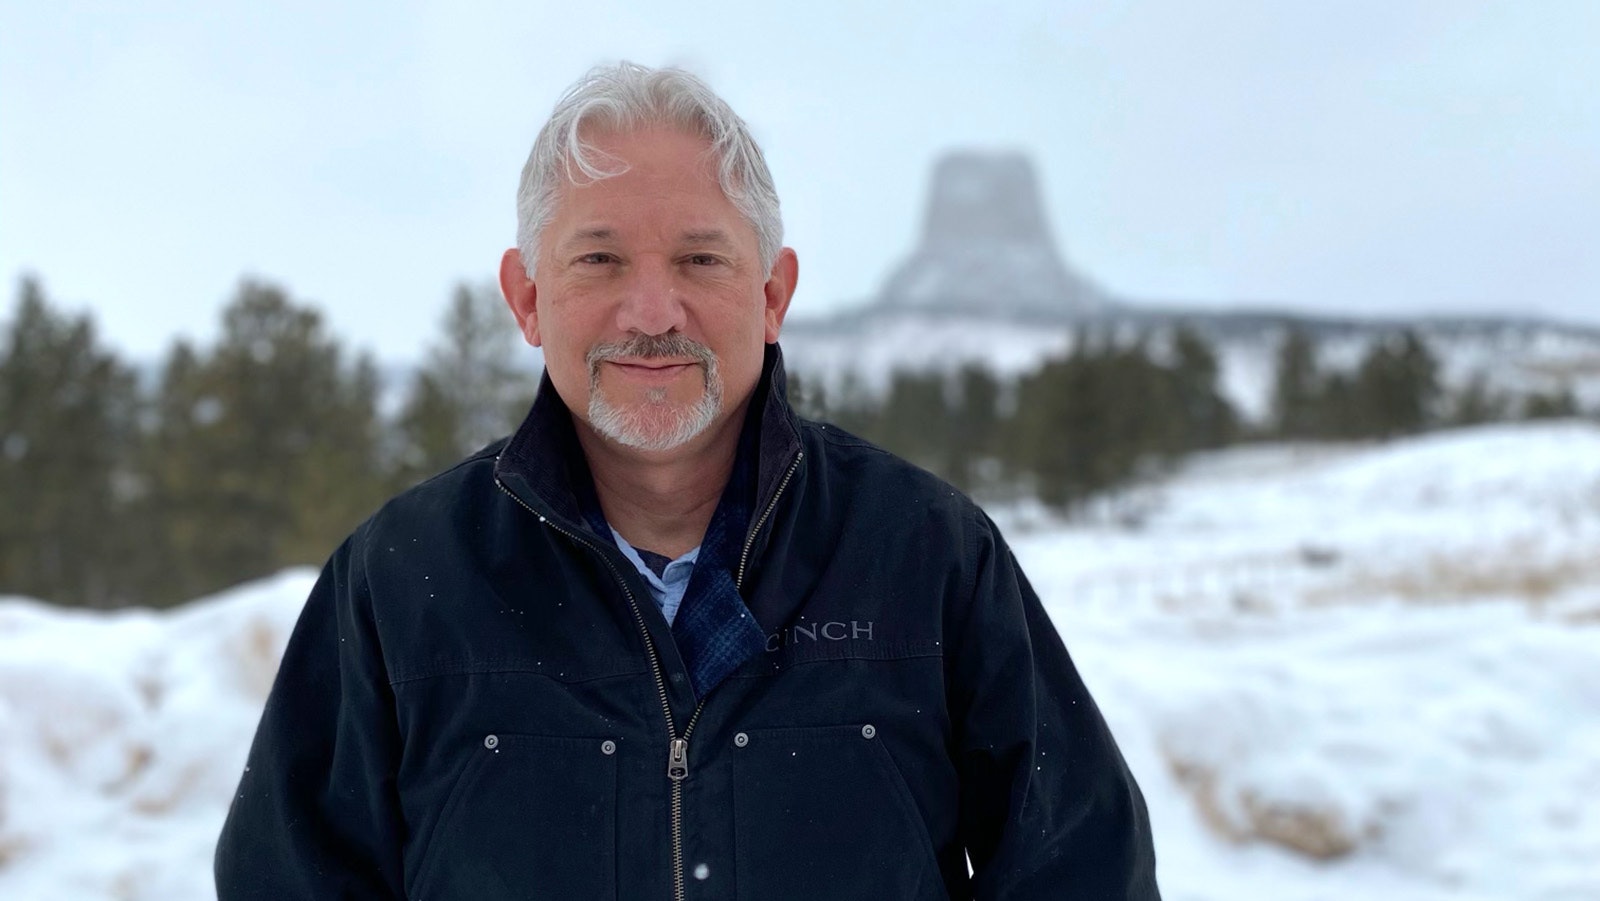 Mike Romano, who owns a ranch near Devils Tower, was raised in Pennsylvania, but has come to love Wyoming and its wildlife.